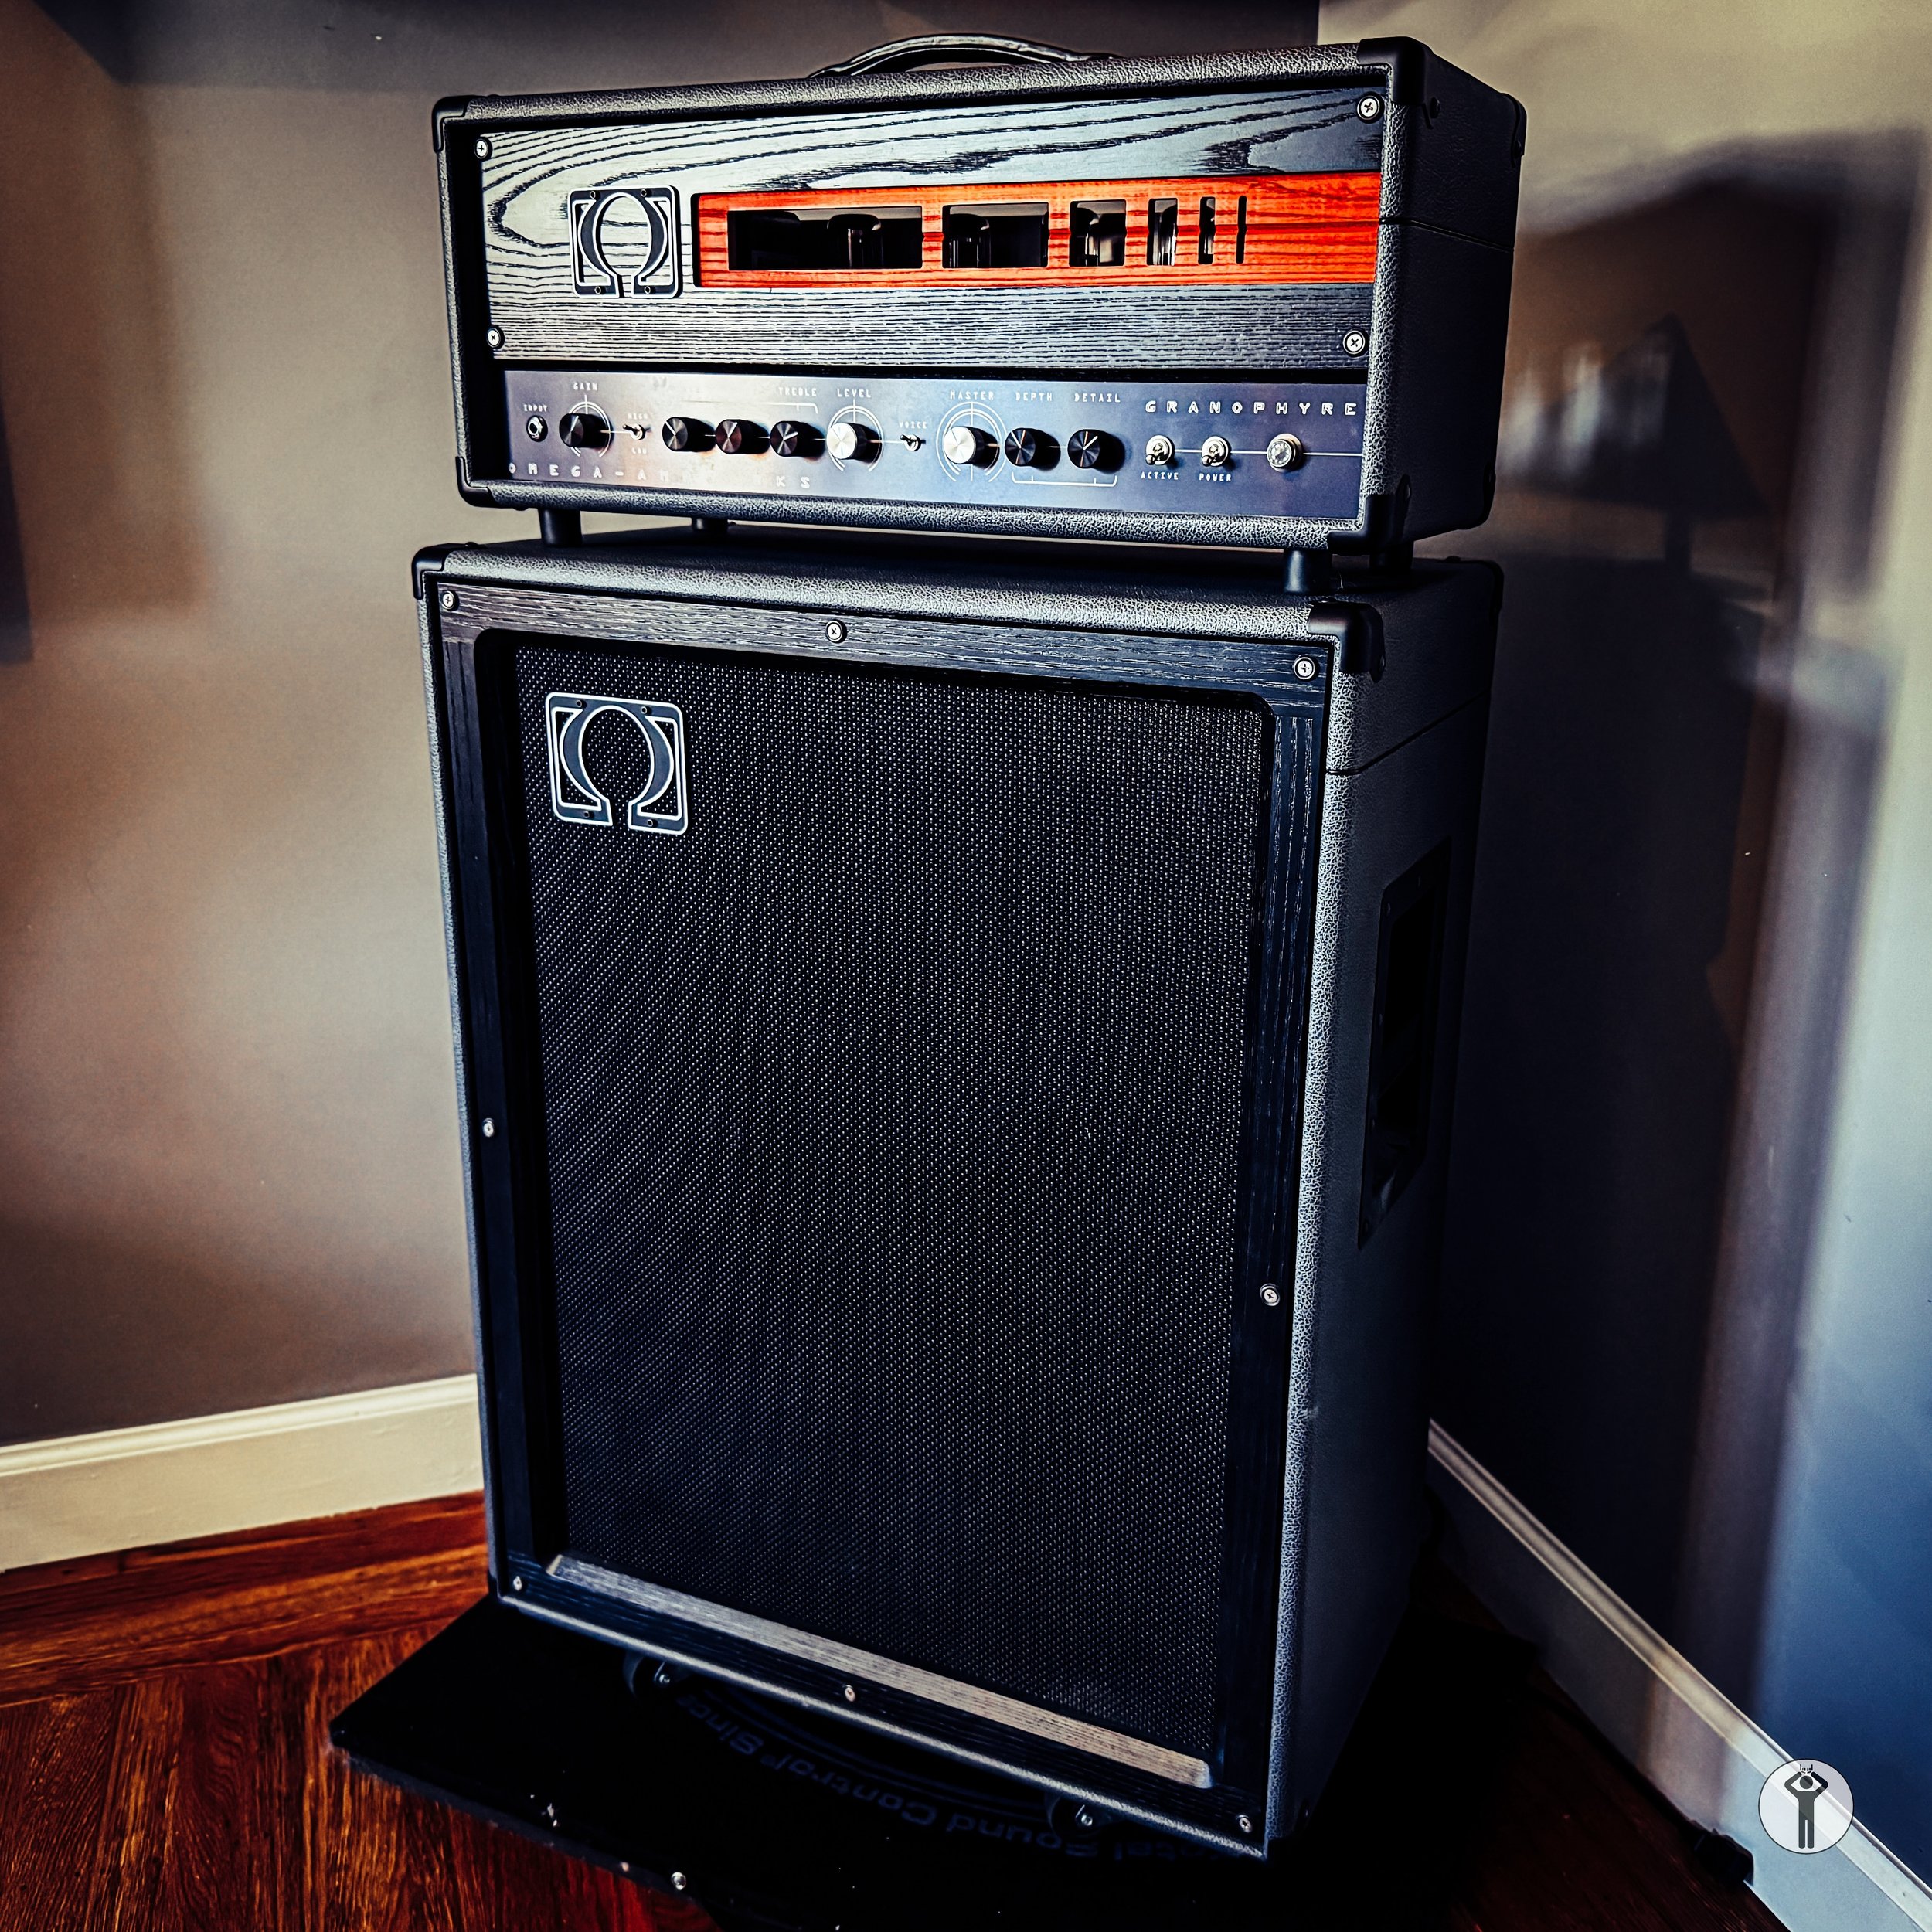 As I mentioned in my last post most of the amps are going up for sale.  Here is my @omegaampworks Granophyre.  I am the original owner and this is paired with a prototype vertical and convertible 2x12 cabinet.  Located Oakland California&hellip; make